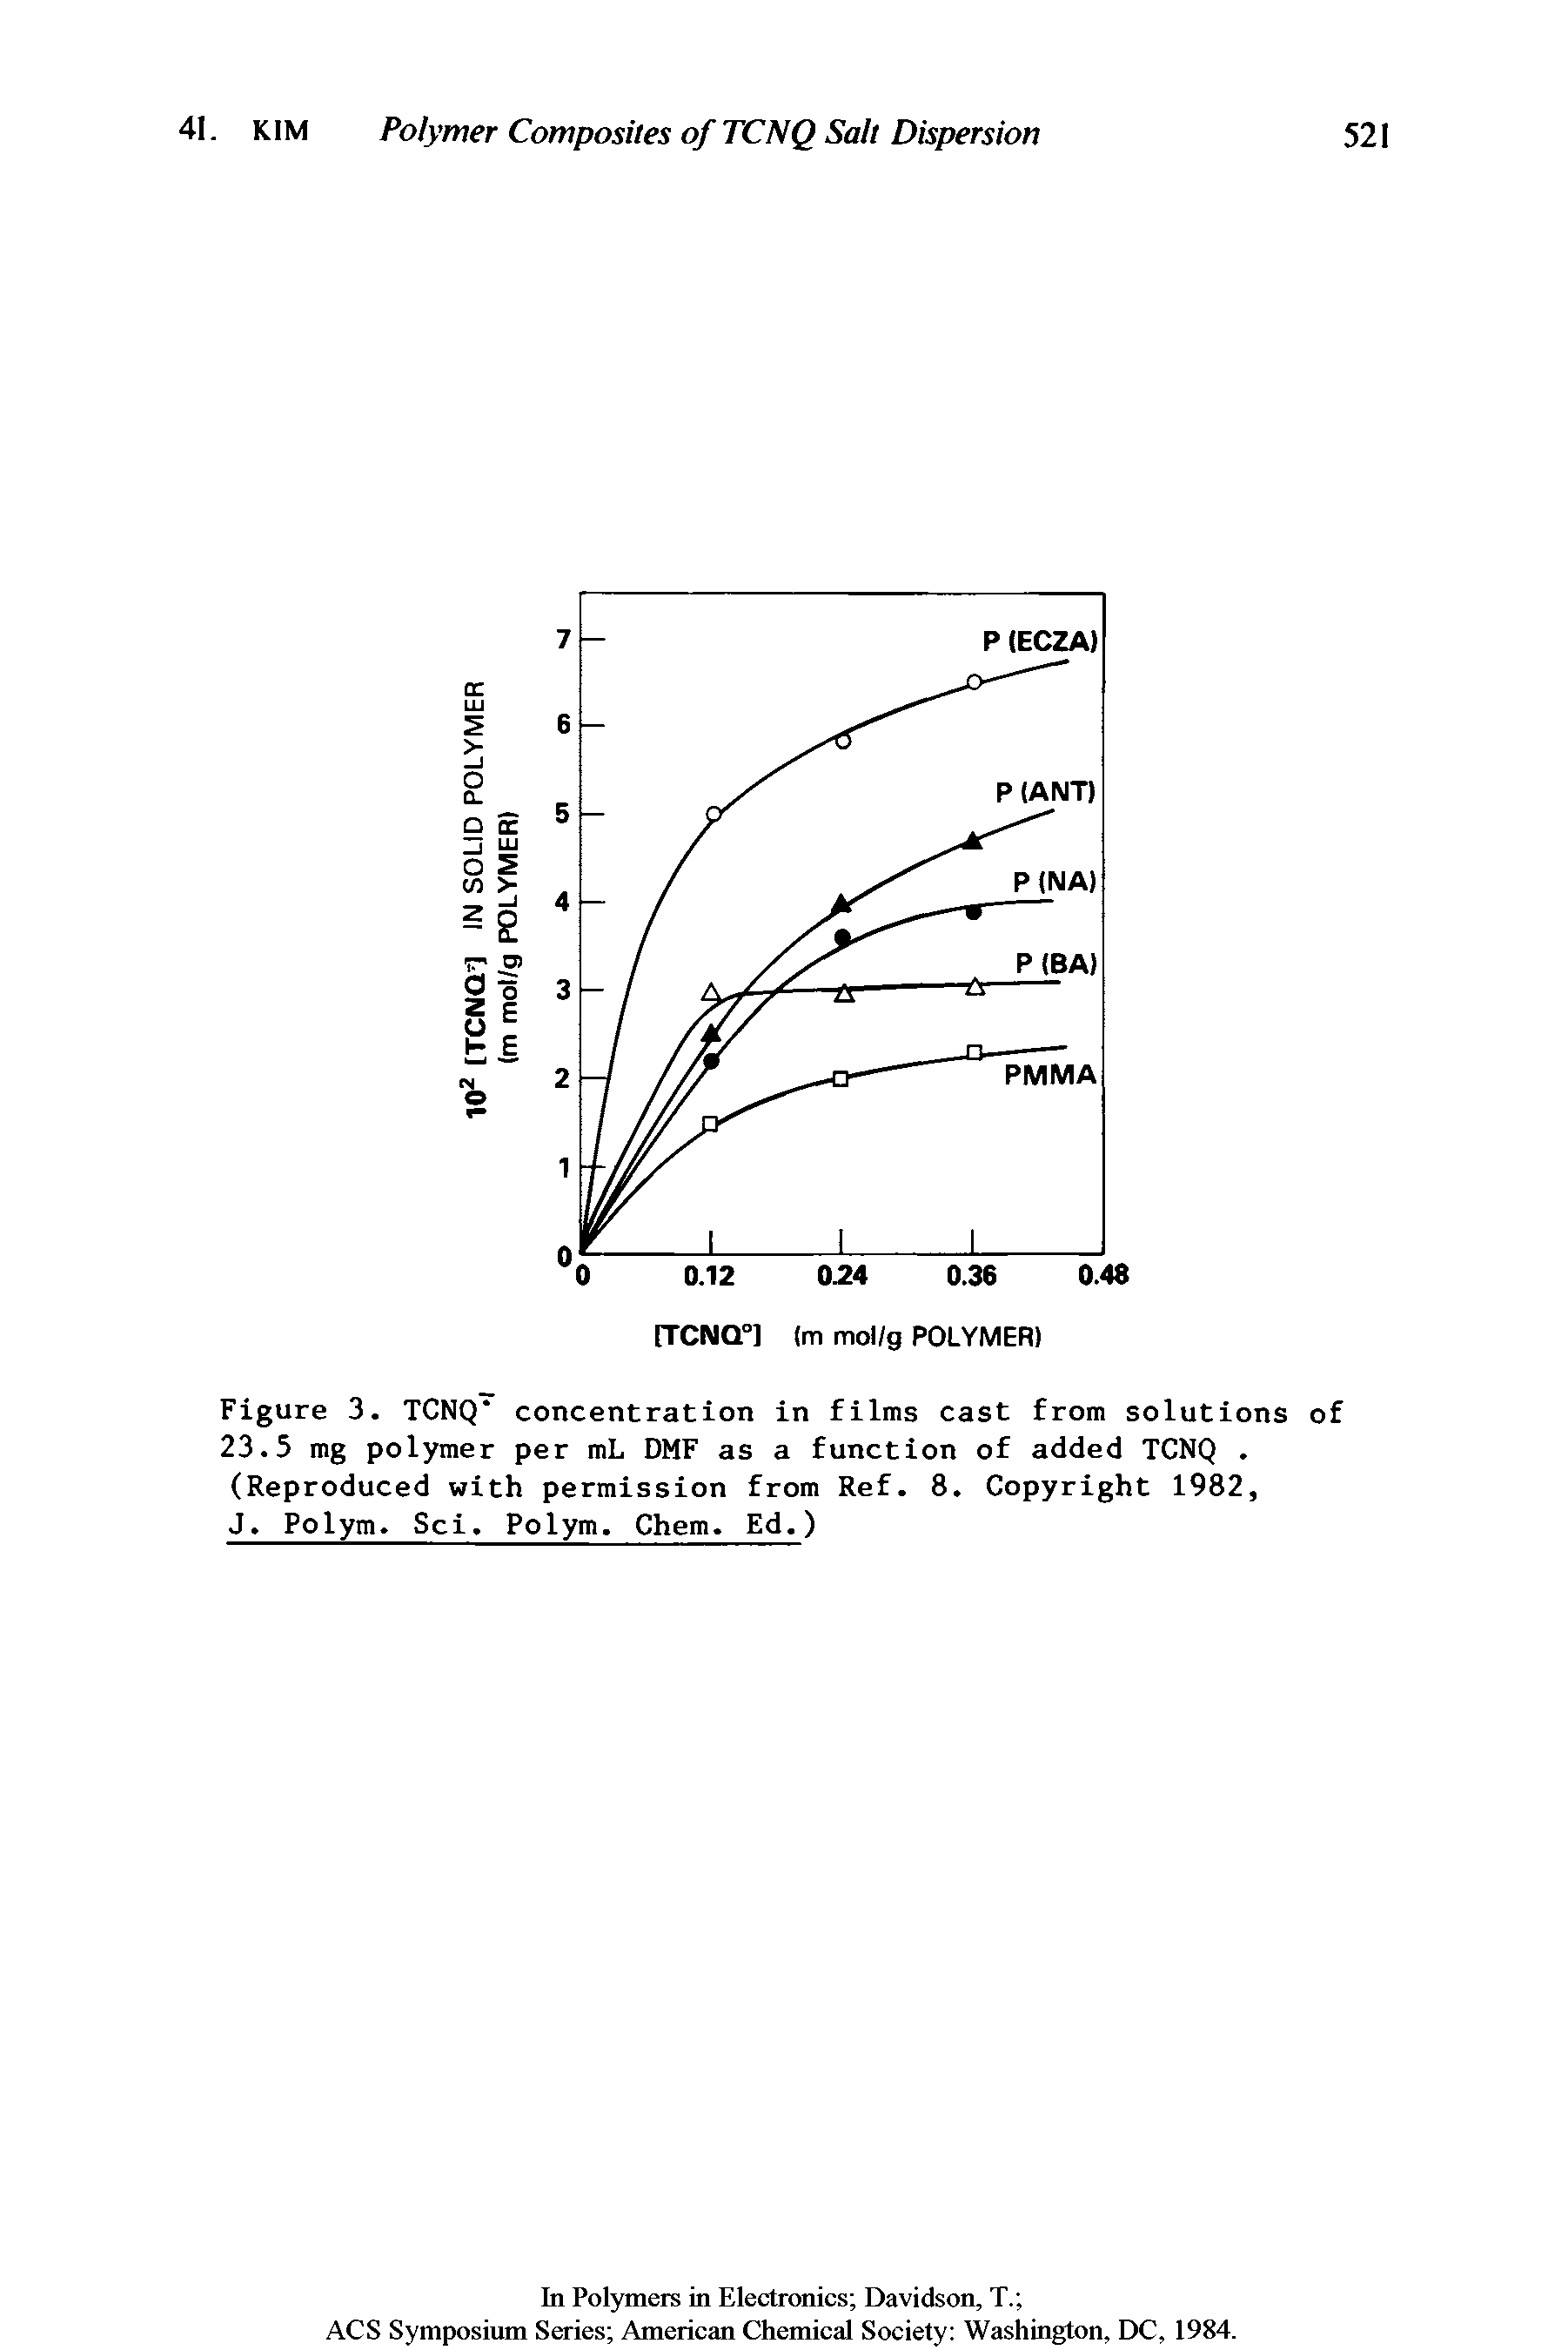 Figure 3. TCNQ concentration in films cast from solutions of 23.5 mg polymer per mL DMF as a function of added TCNQ. (Reproduced with permission from Ref. 8. Copyright 1982,...